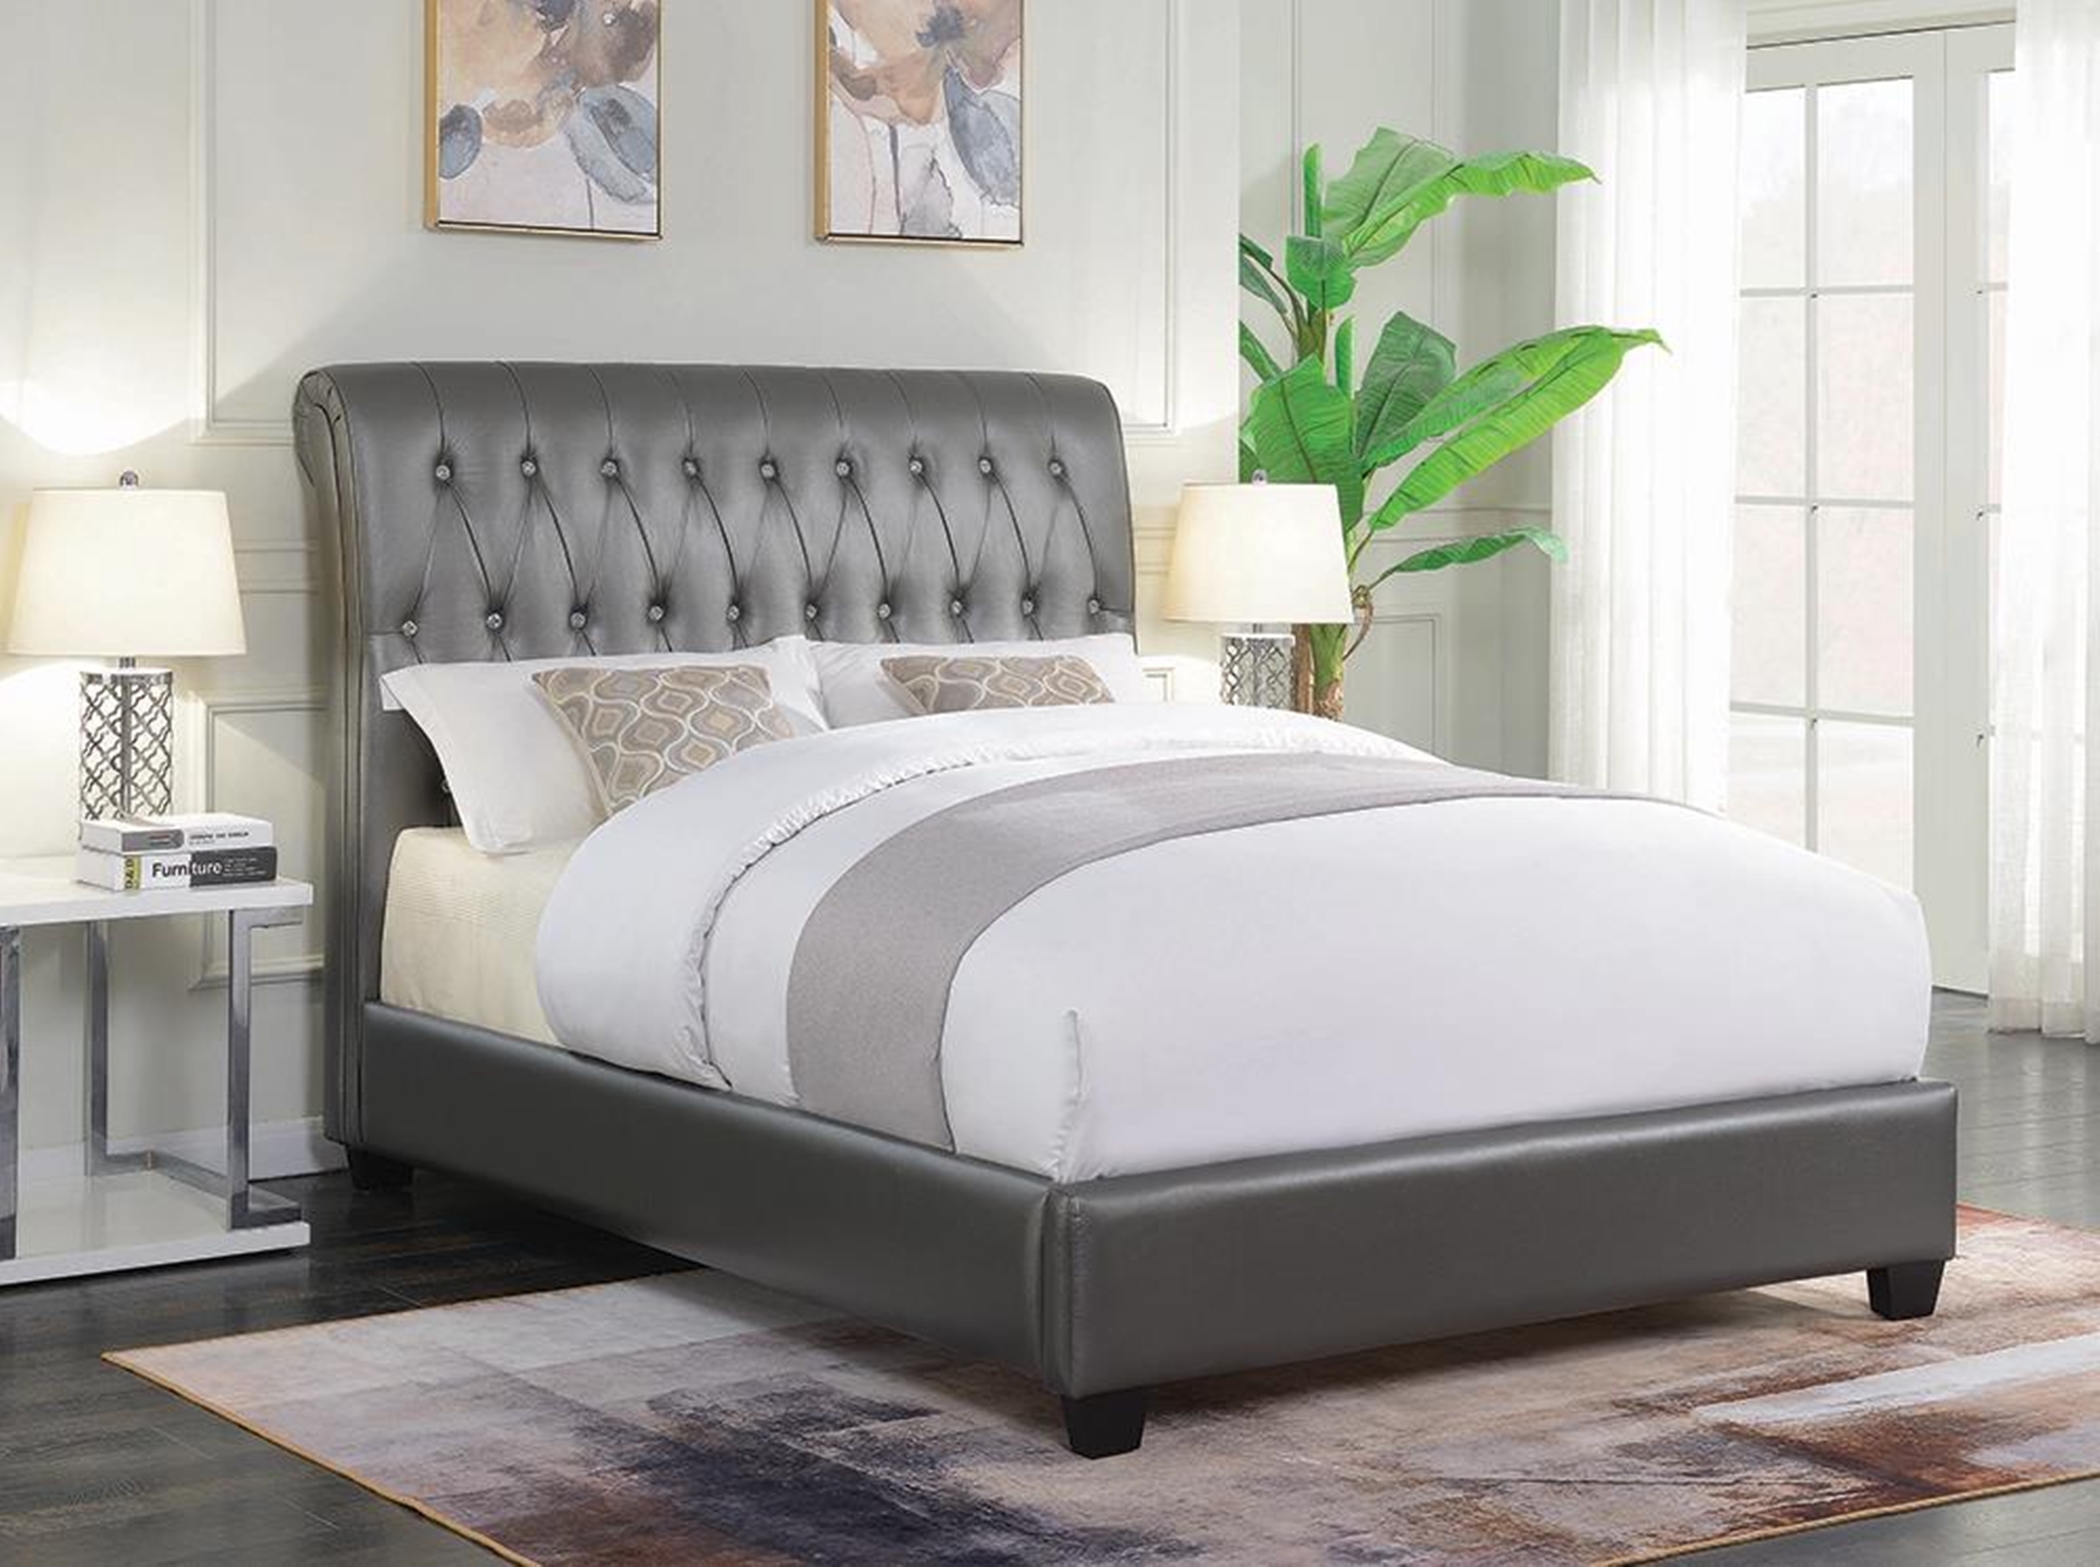 Siesta C King Bed - Click Image to Close